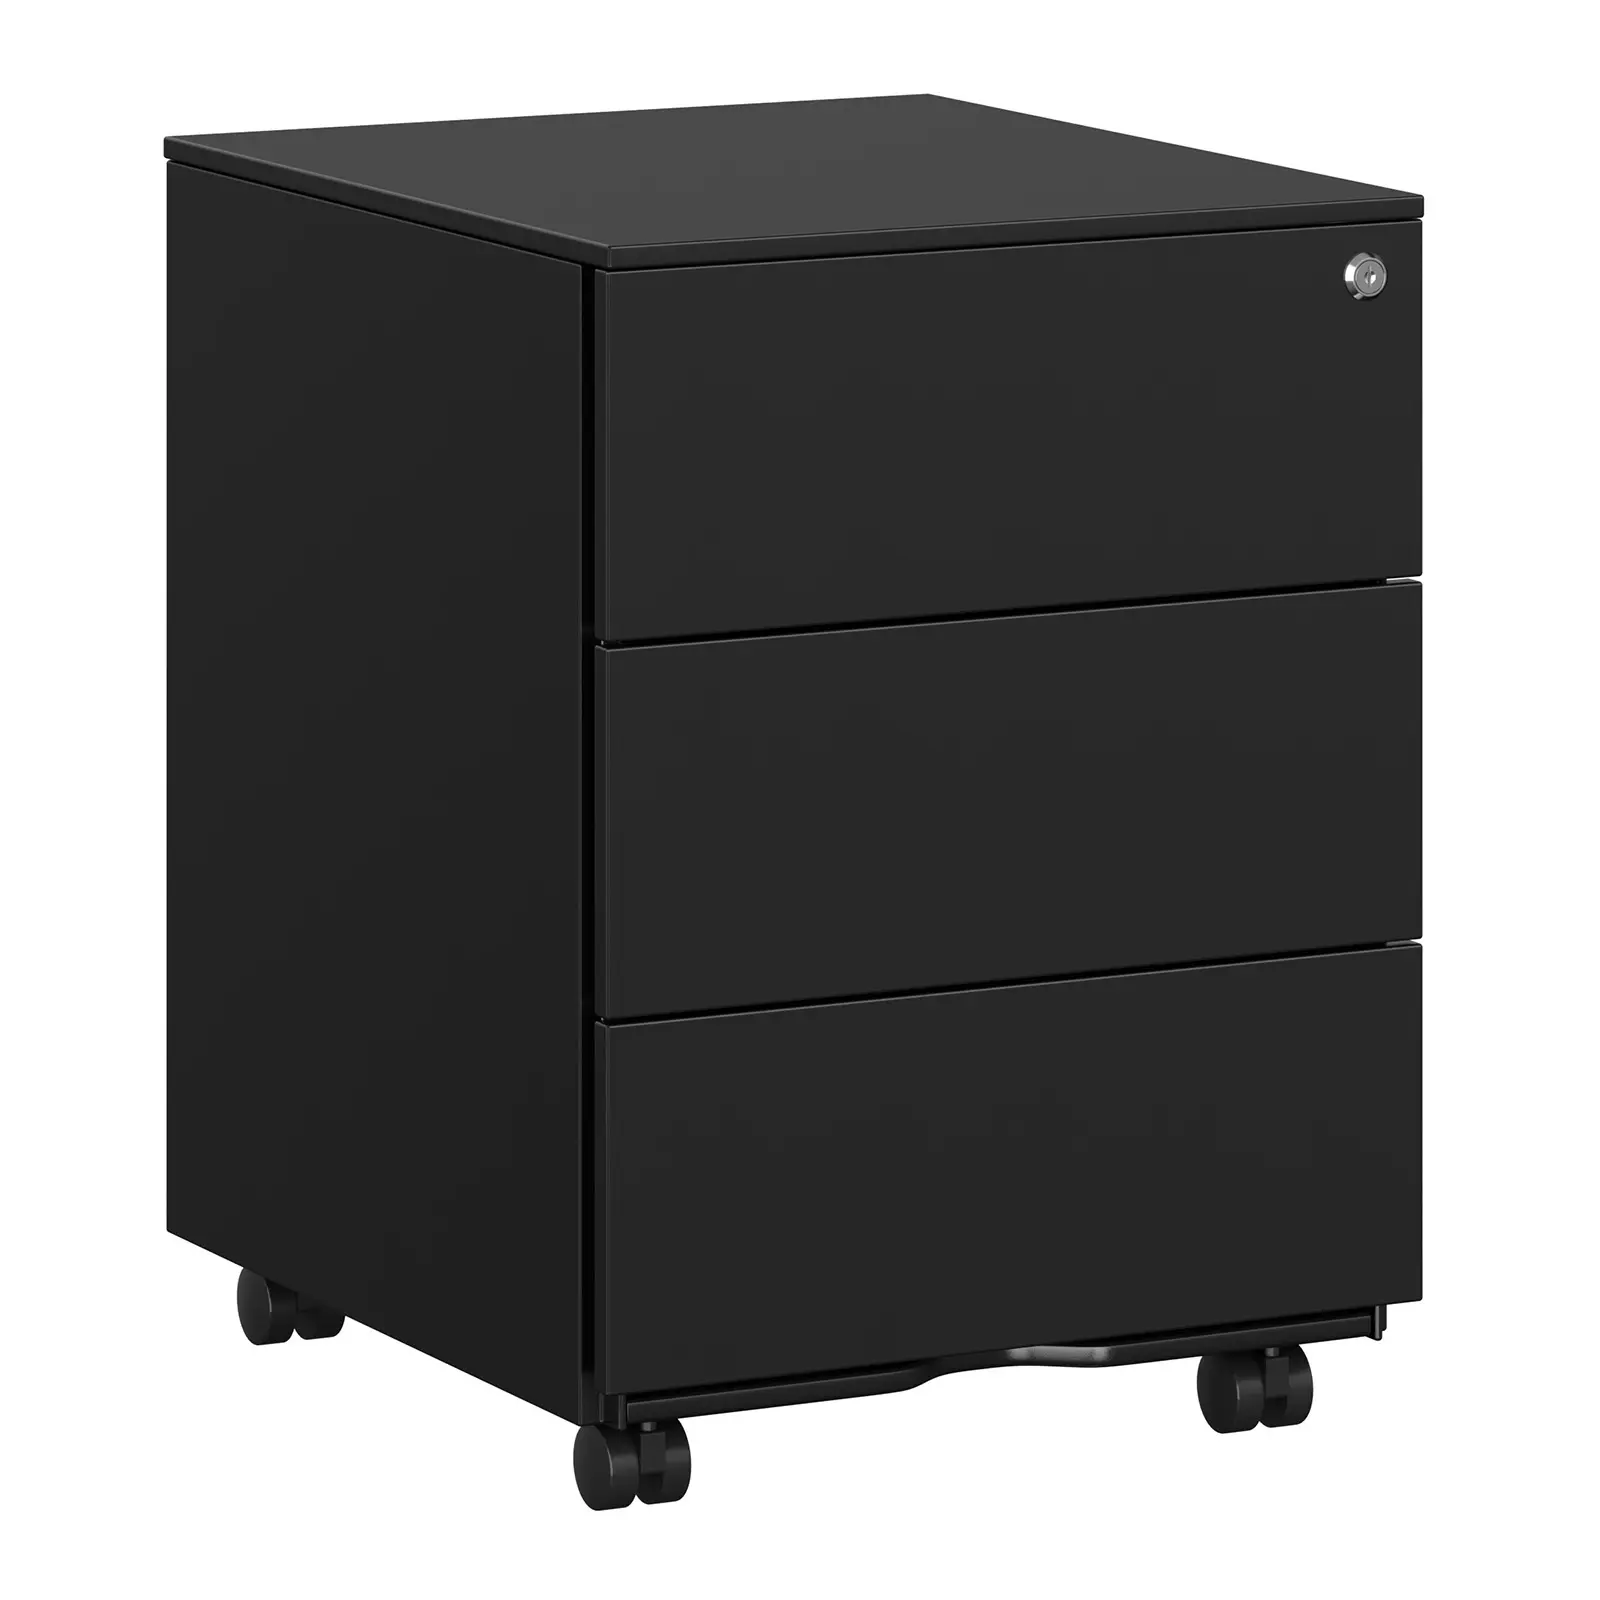 SONGMICS Steel Furniture Hold Documents Stationery Small Pre-assembled Mobile File Cabinet Home Office